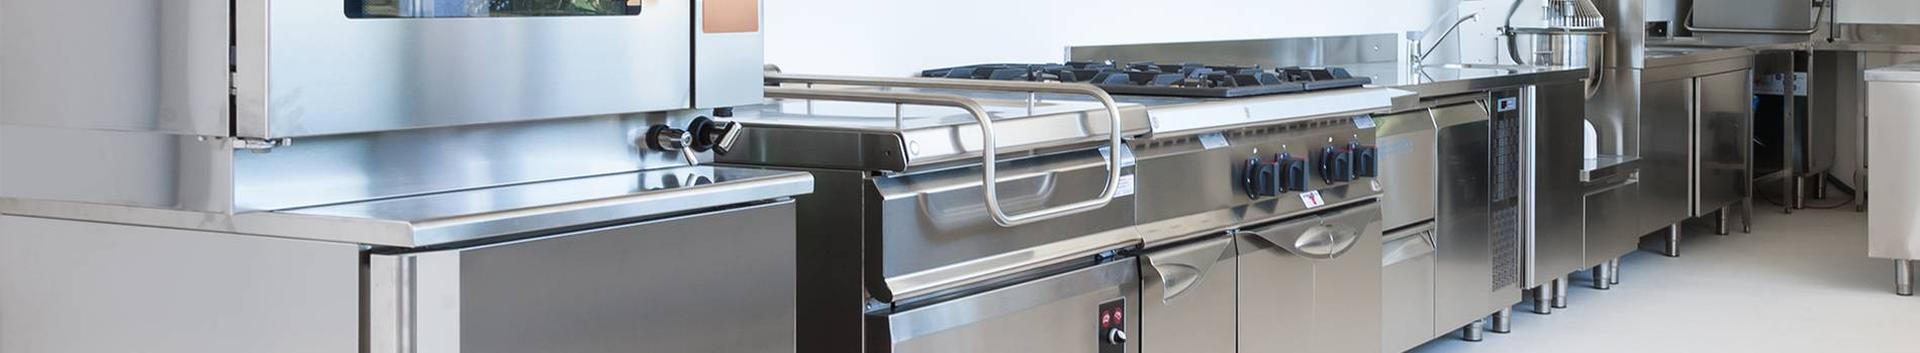 Commercial equipment and consumables, machinery and equipment for the food industry, Equipment for catering establishments, catering supplies, furnishings of catering establishments, Large kitchen appliances